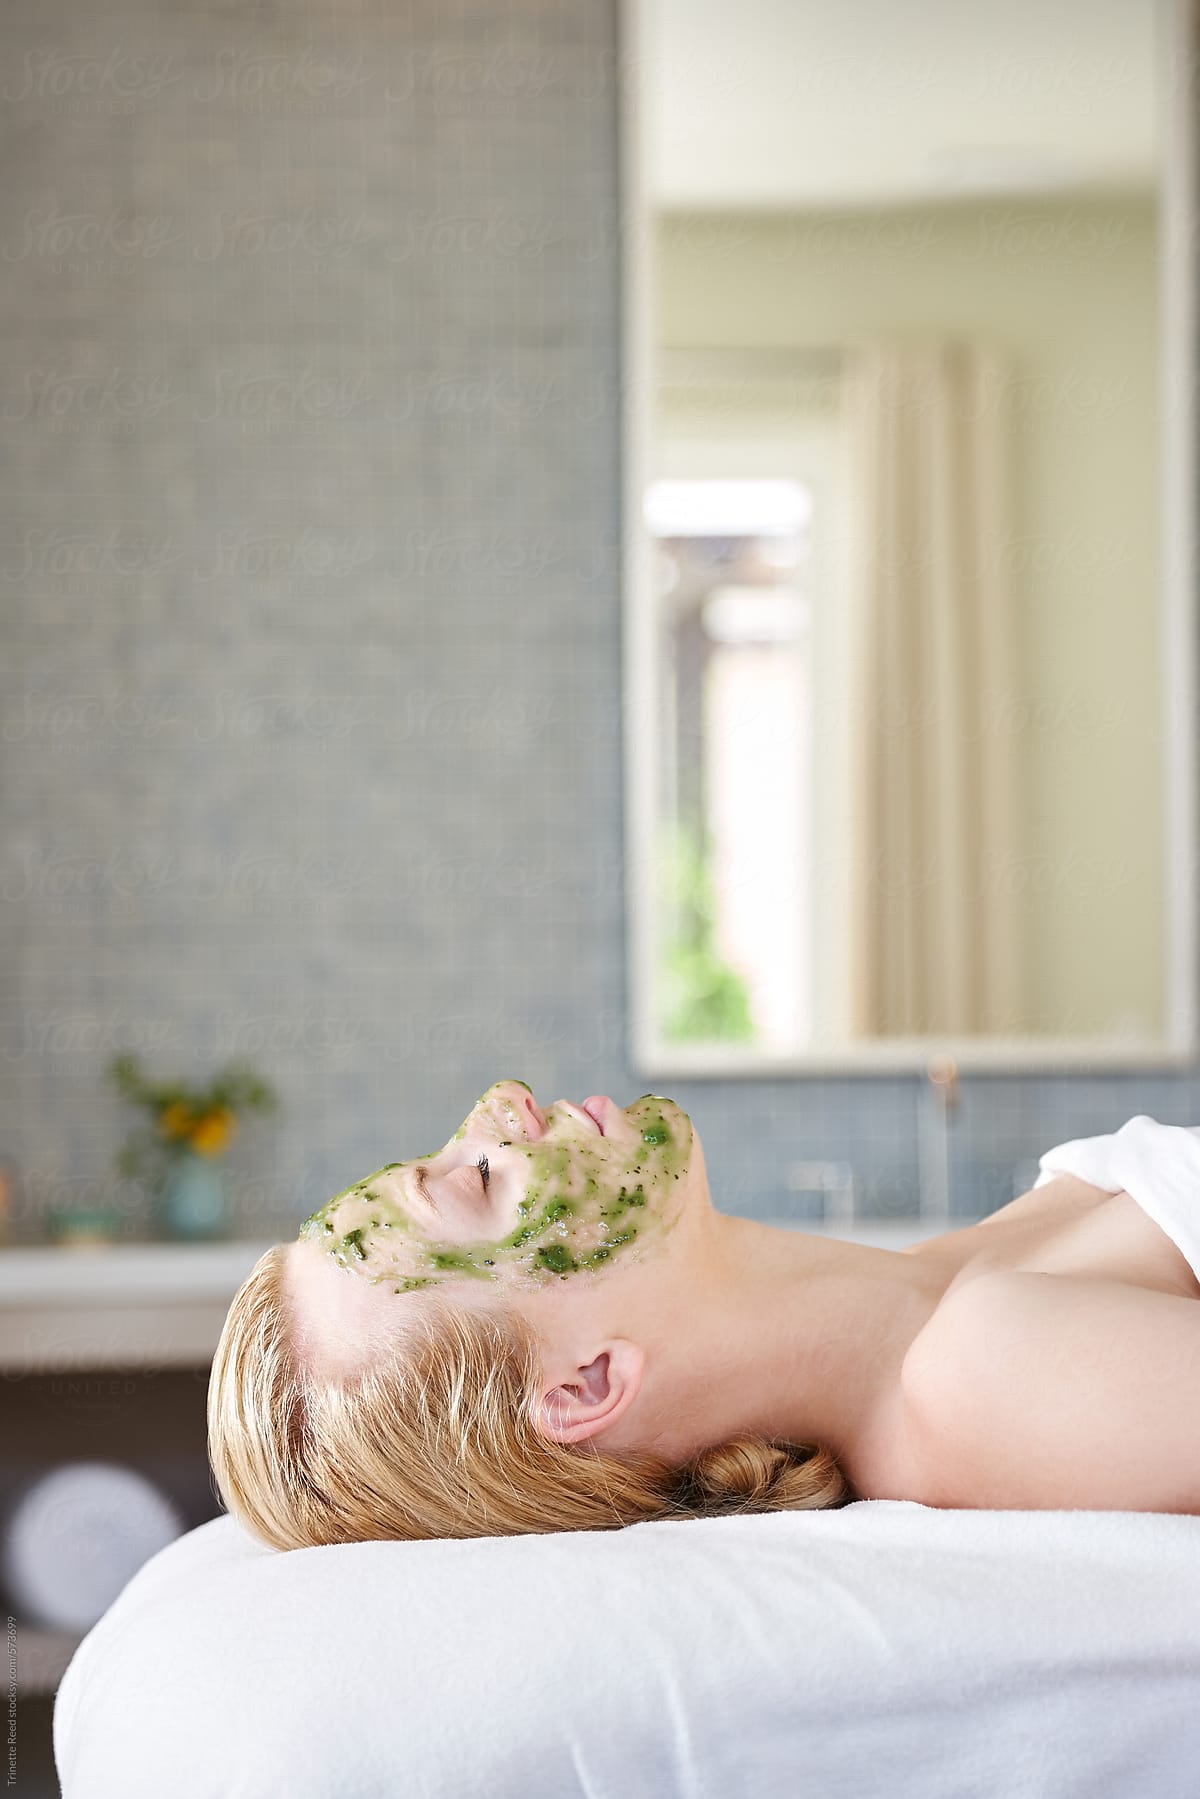 Woman receiving all natural facial at luxury spa room